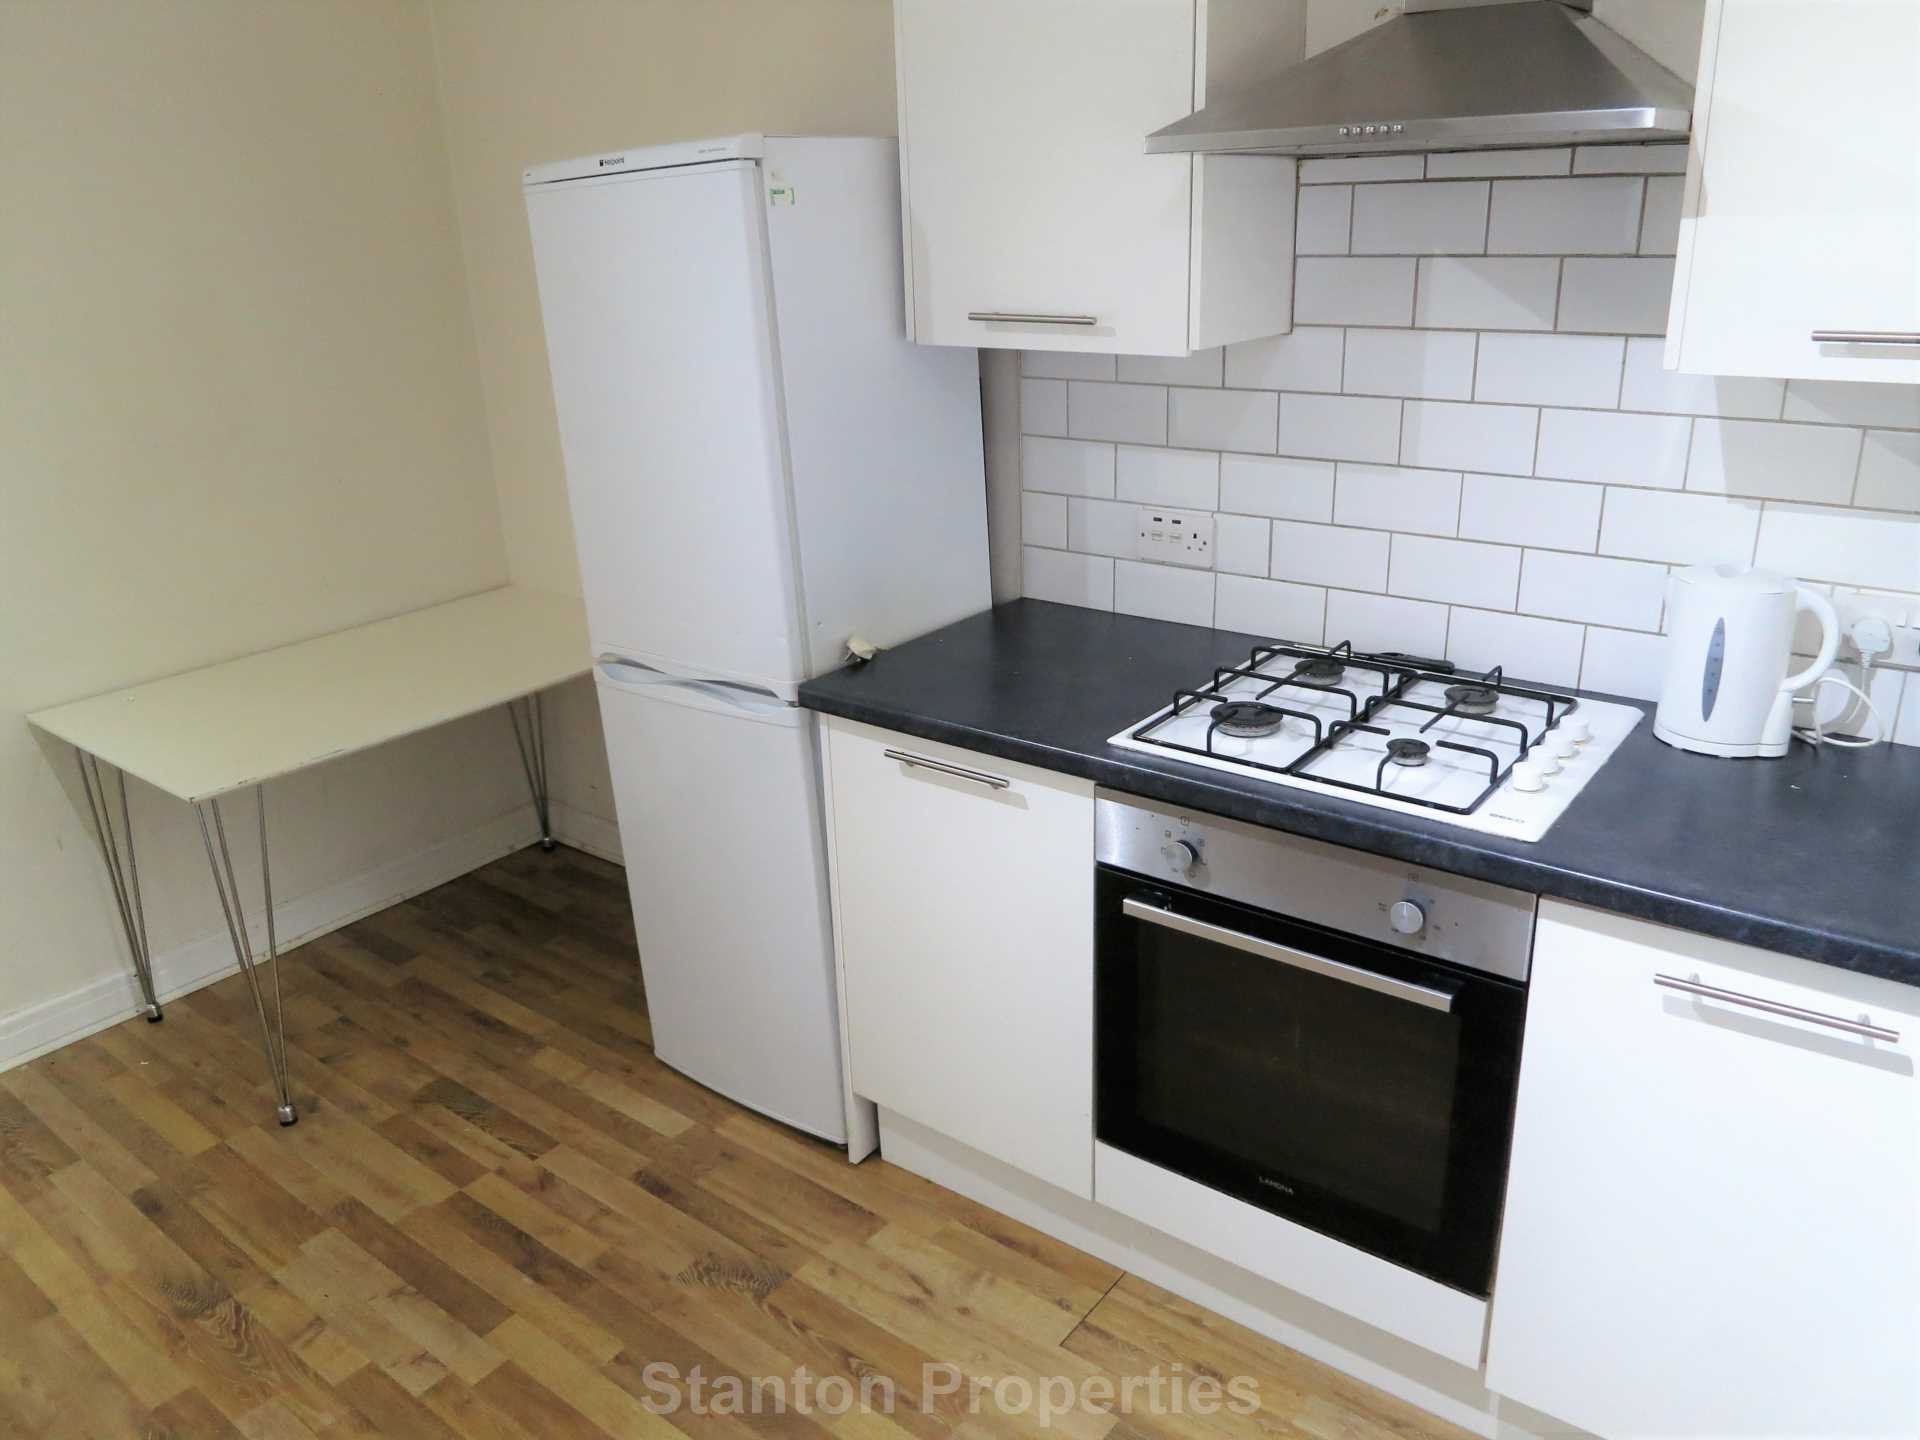 £150 pppw including bills, Burton Road, Withington, Image 3